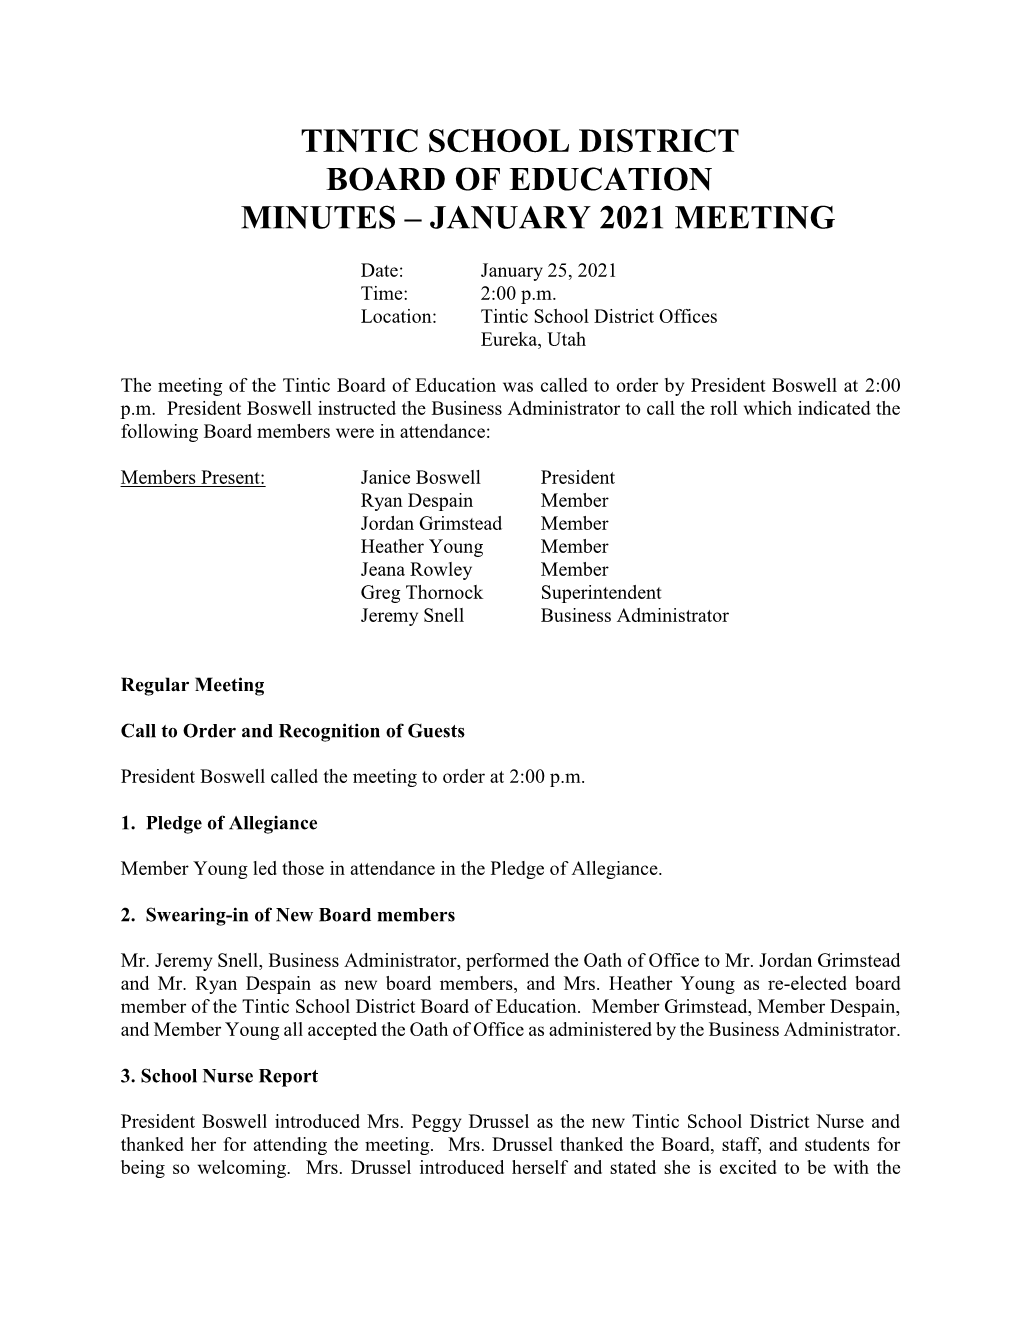 Tintic School District Board of Education Minutes – January 2021 Meeting